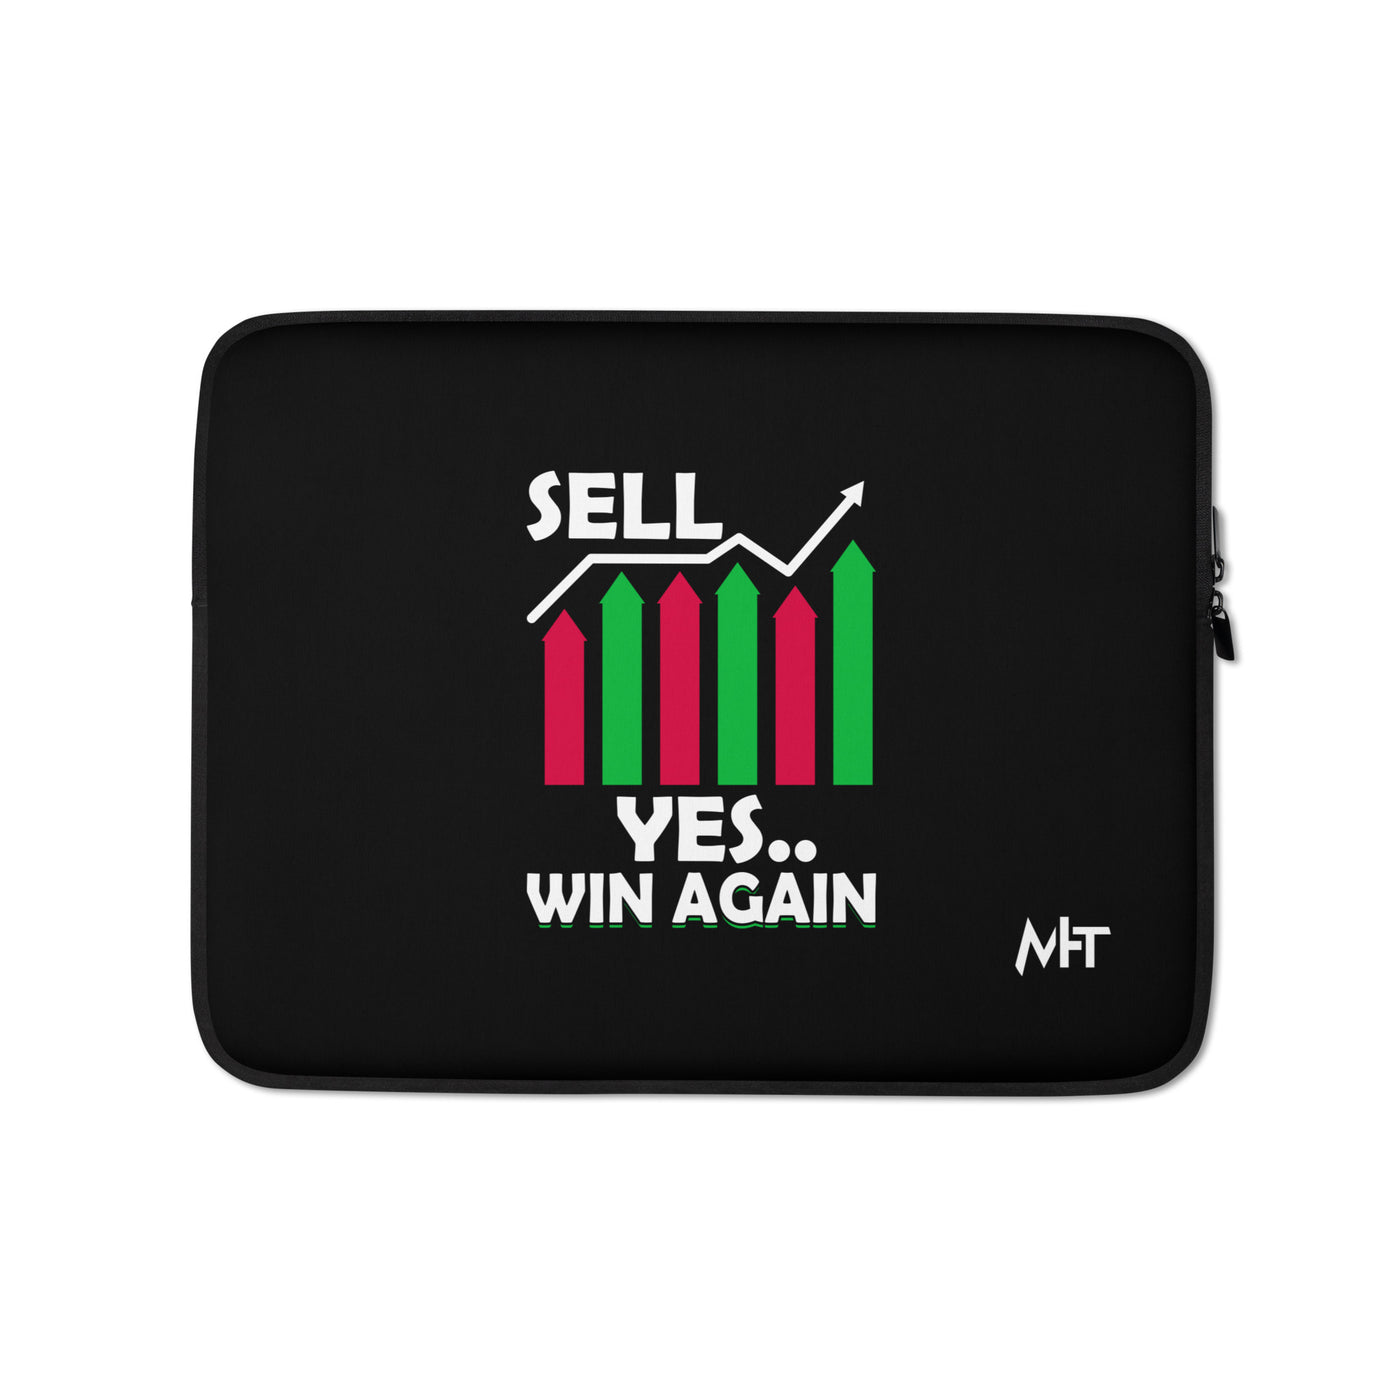 Sell: Yes..Win again! - Laptop Sleeve